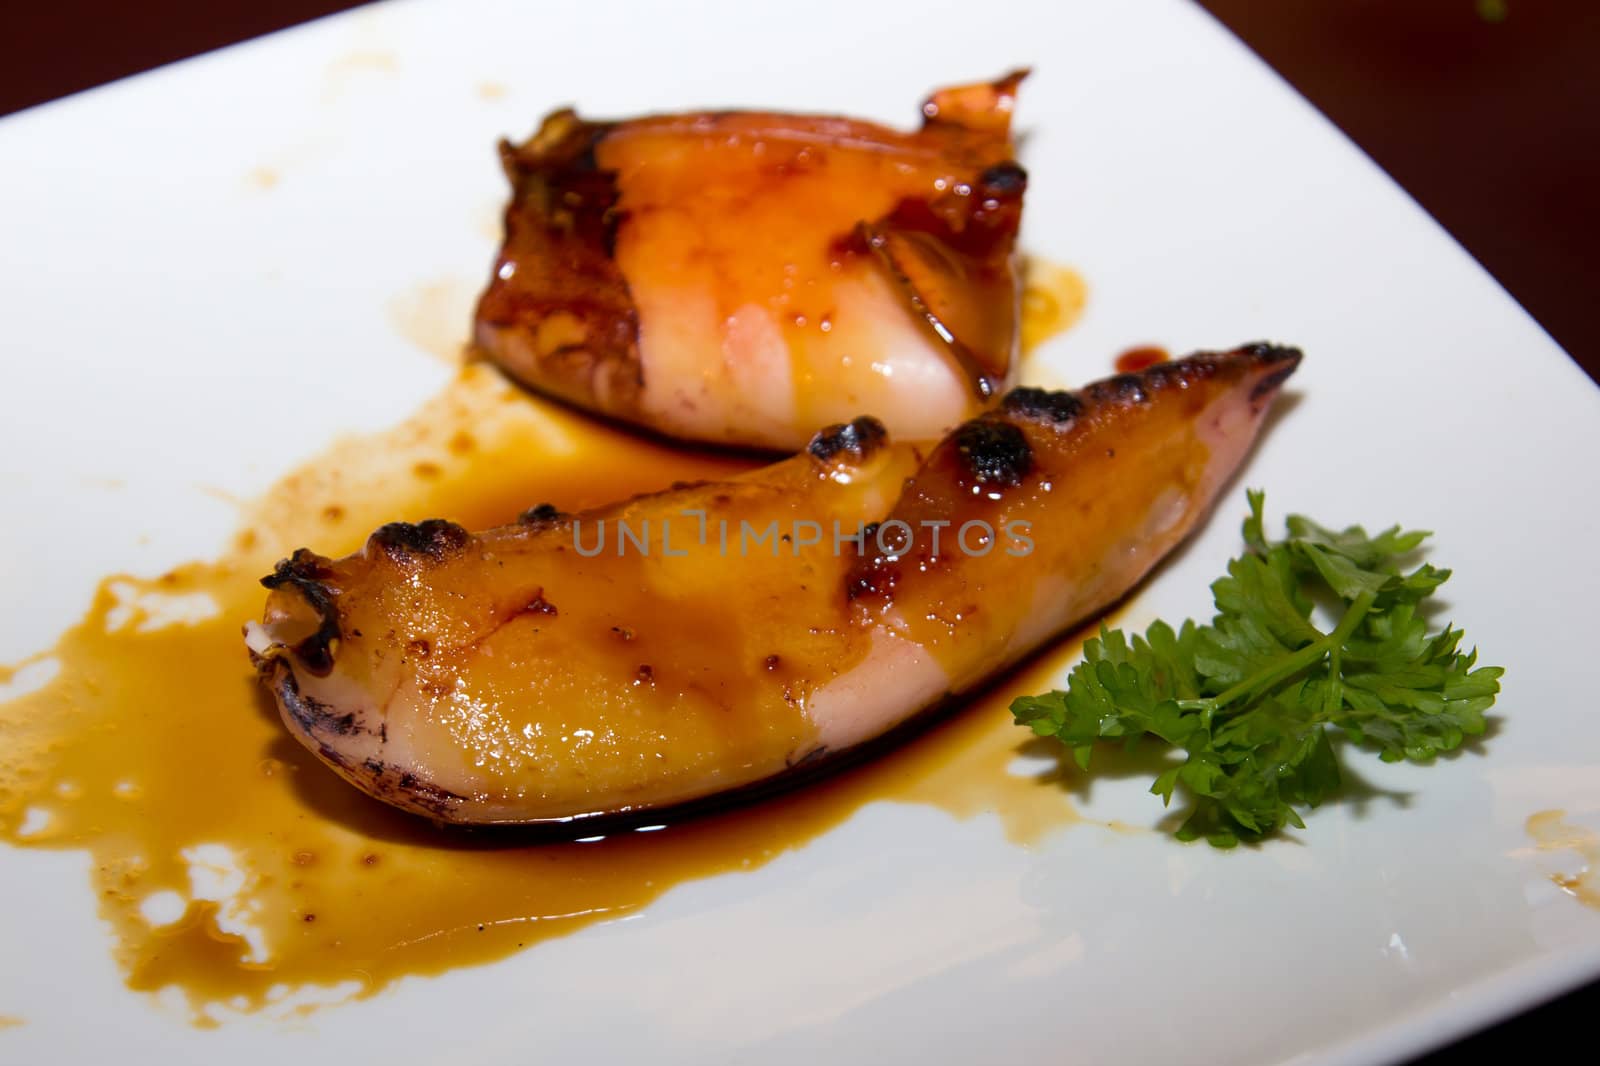 Grilled squid with black sauce by Kenishirotie